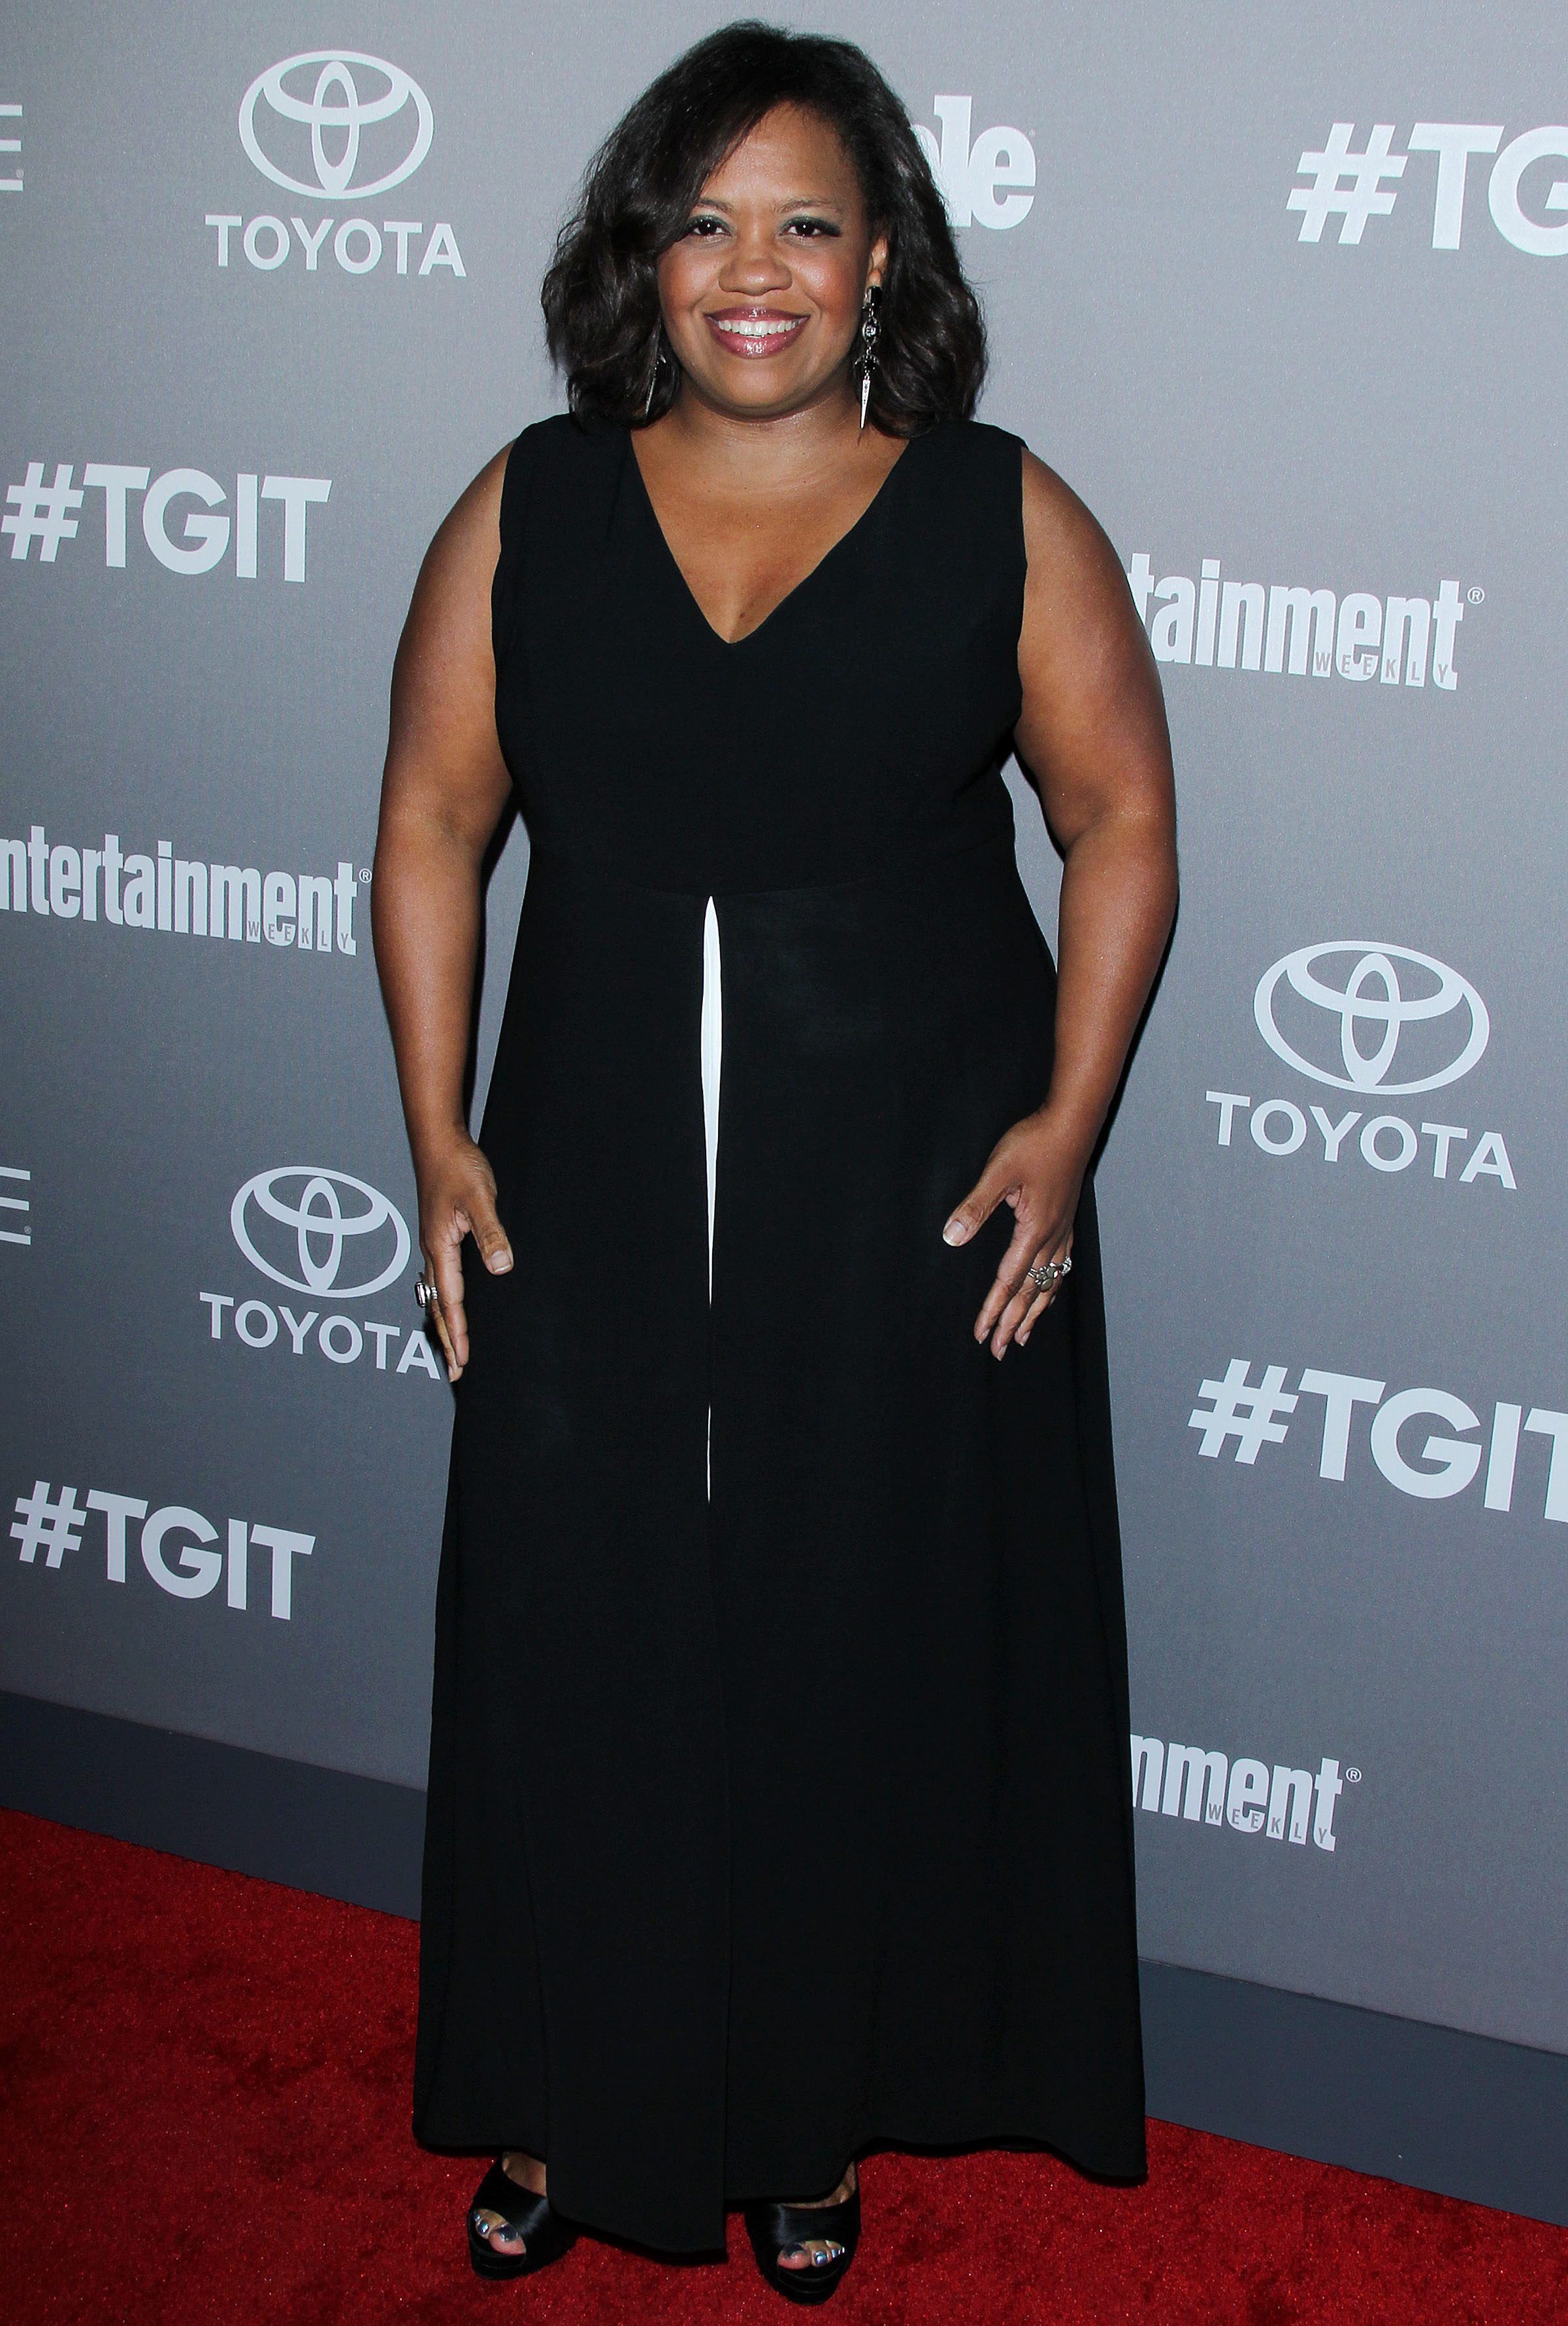 Things You Might Not Know About Grey's Anatomy Star Chandra Wilson - Fame10